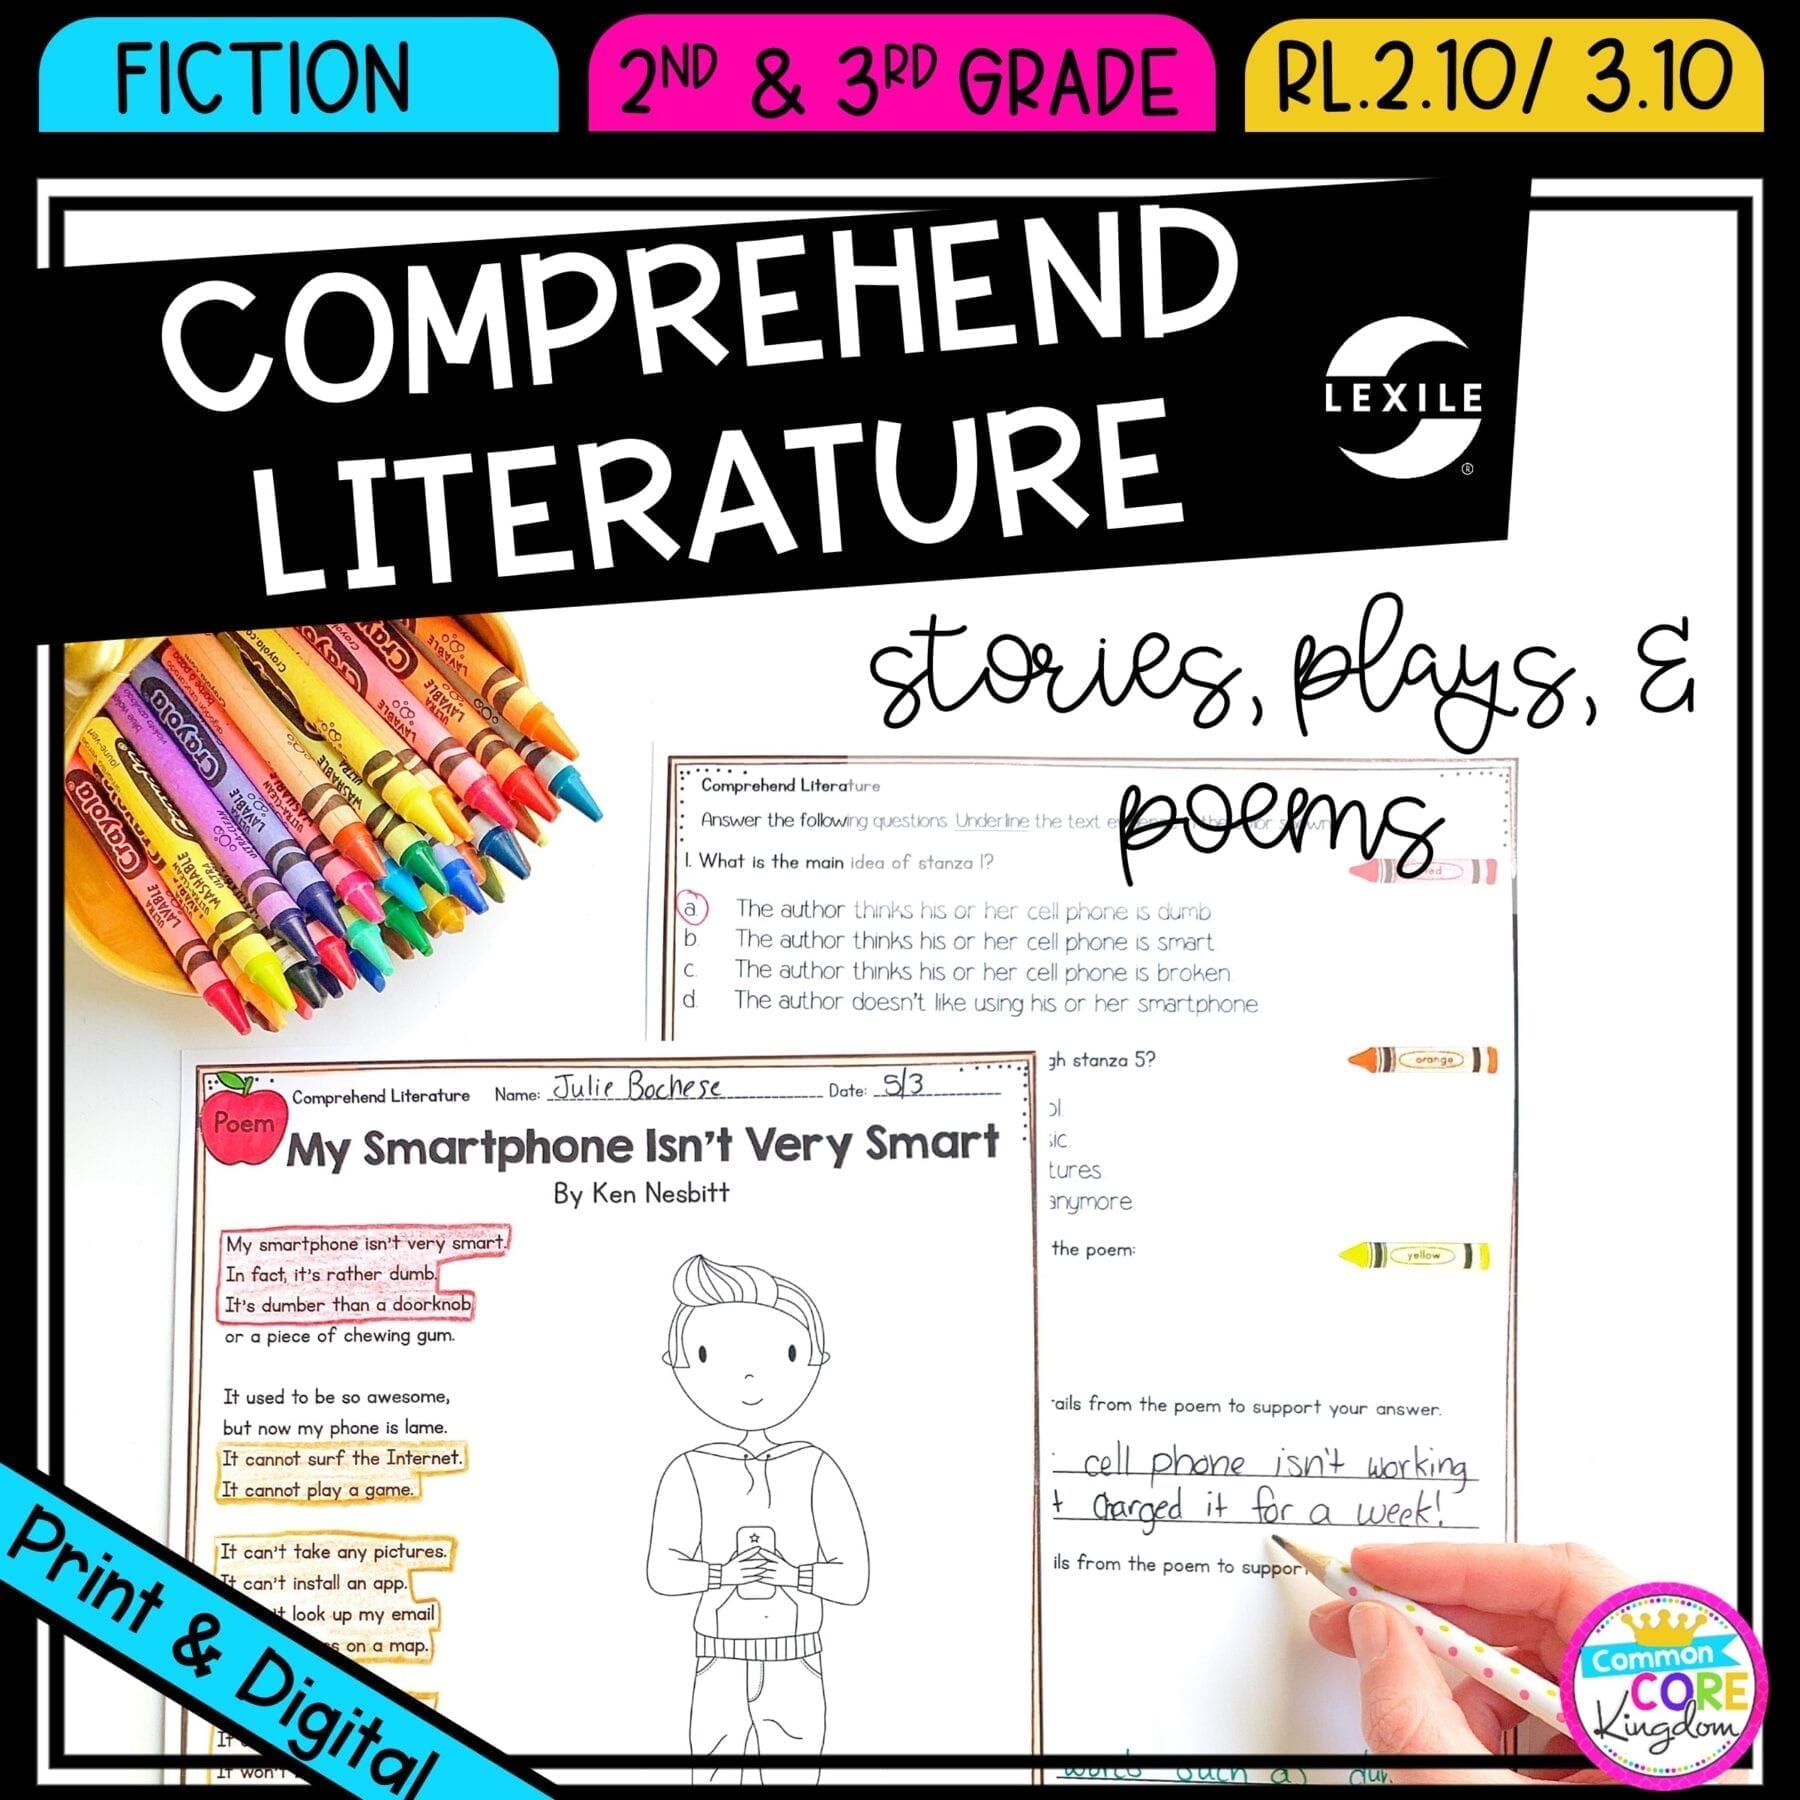 Comprehending Literature for 2nd & 3rd grade cover showing printable and digital worksheets